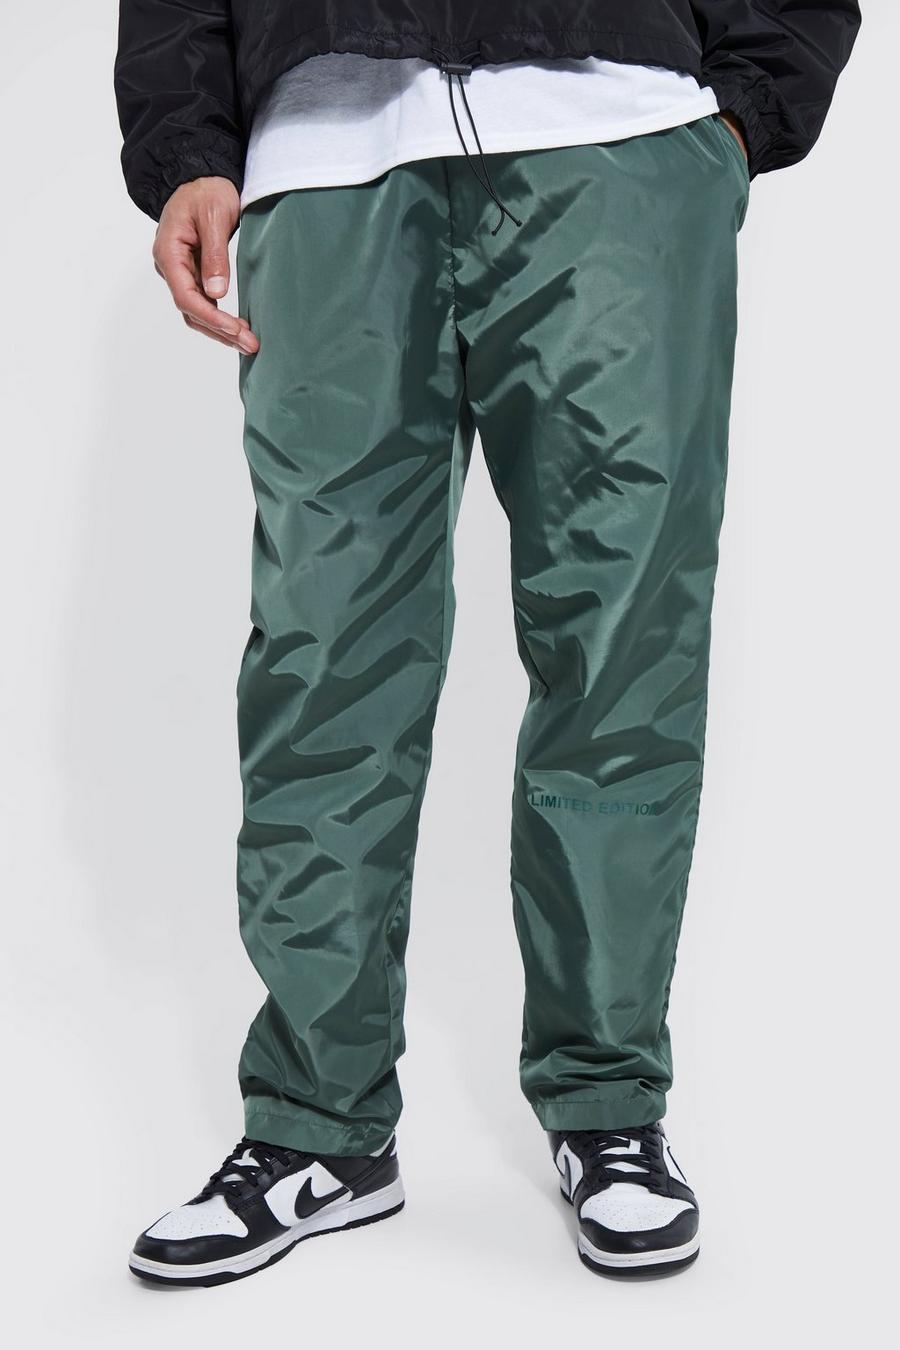 Forest Tall Elastic Waist Limited Edition Trouser 